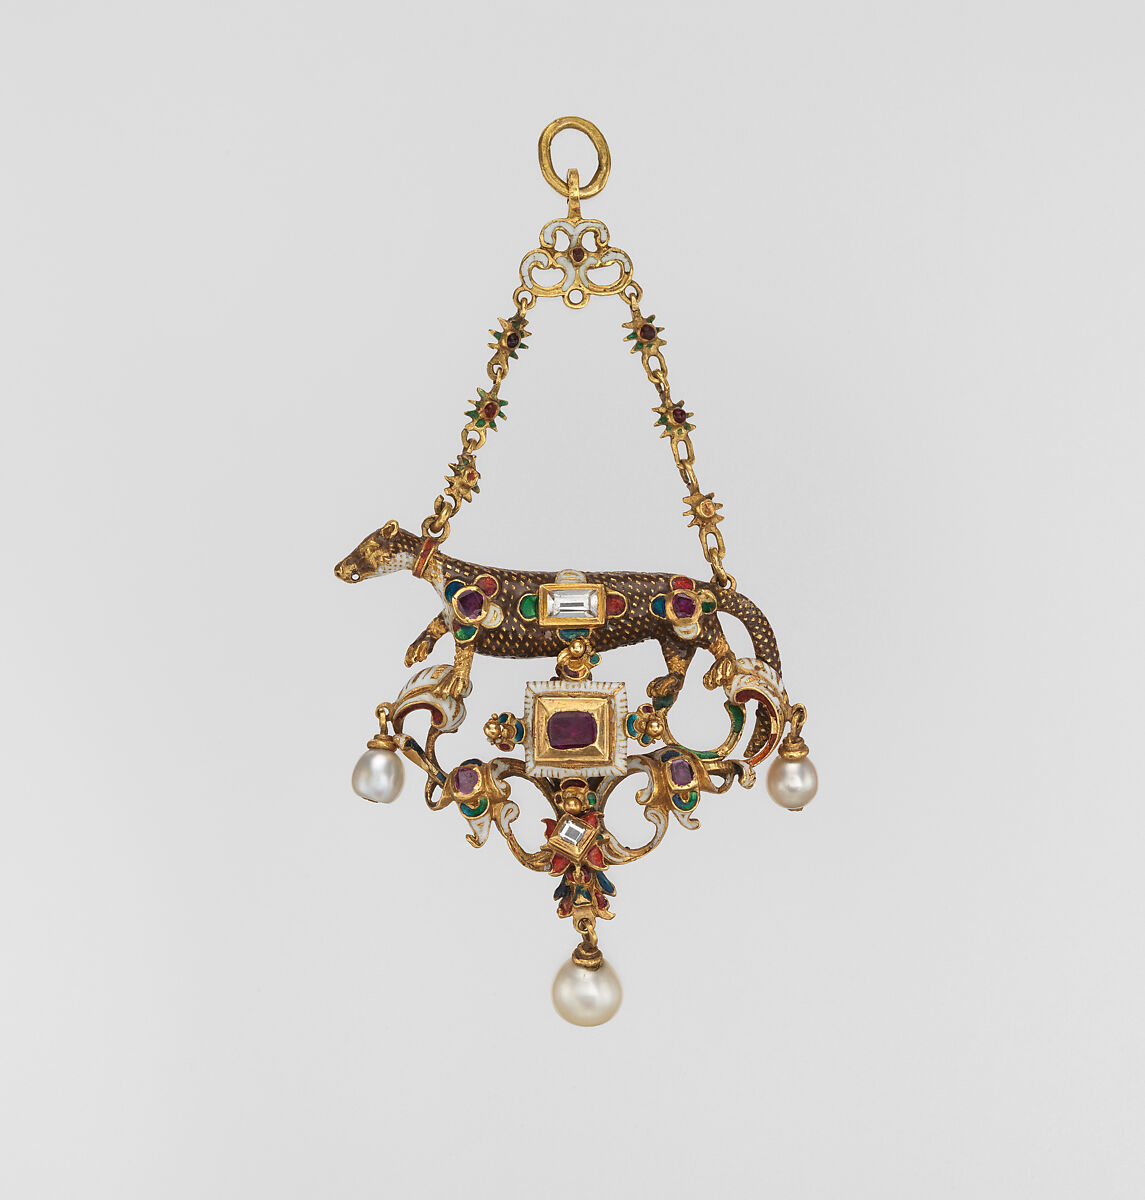 Pendant in the form of a ferret, Gold, partly enameled, set with rubies and diamonds; pearls